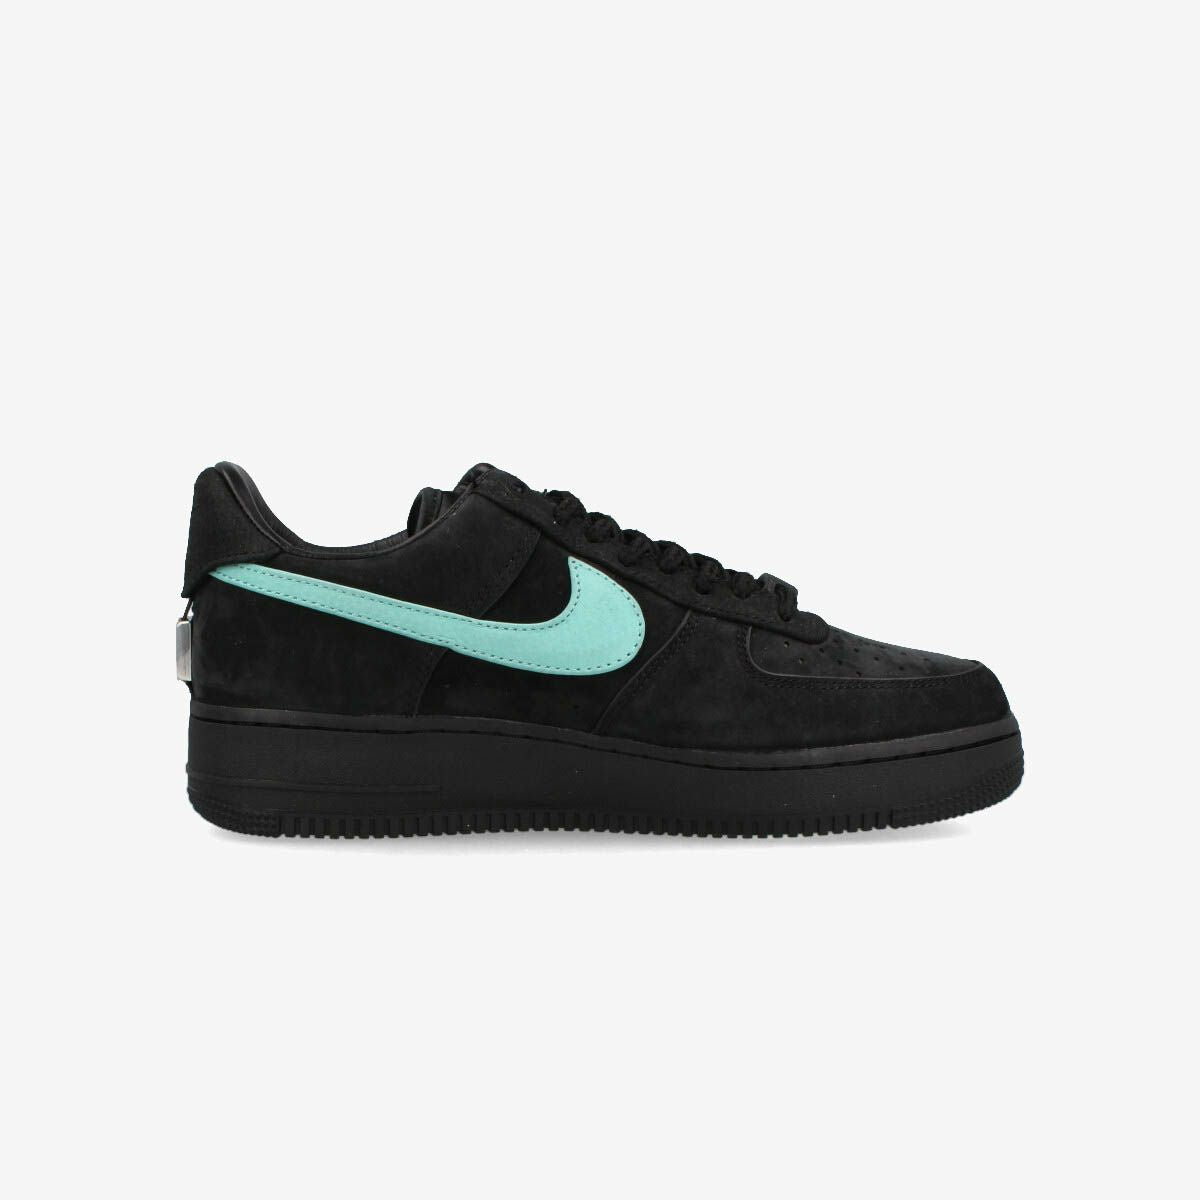 NIKE AIR FORCE 1 LOW 1837 BLACK/MULTI COLOR 【TIFFANY & CO.】